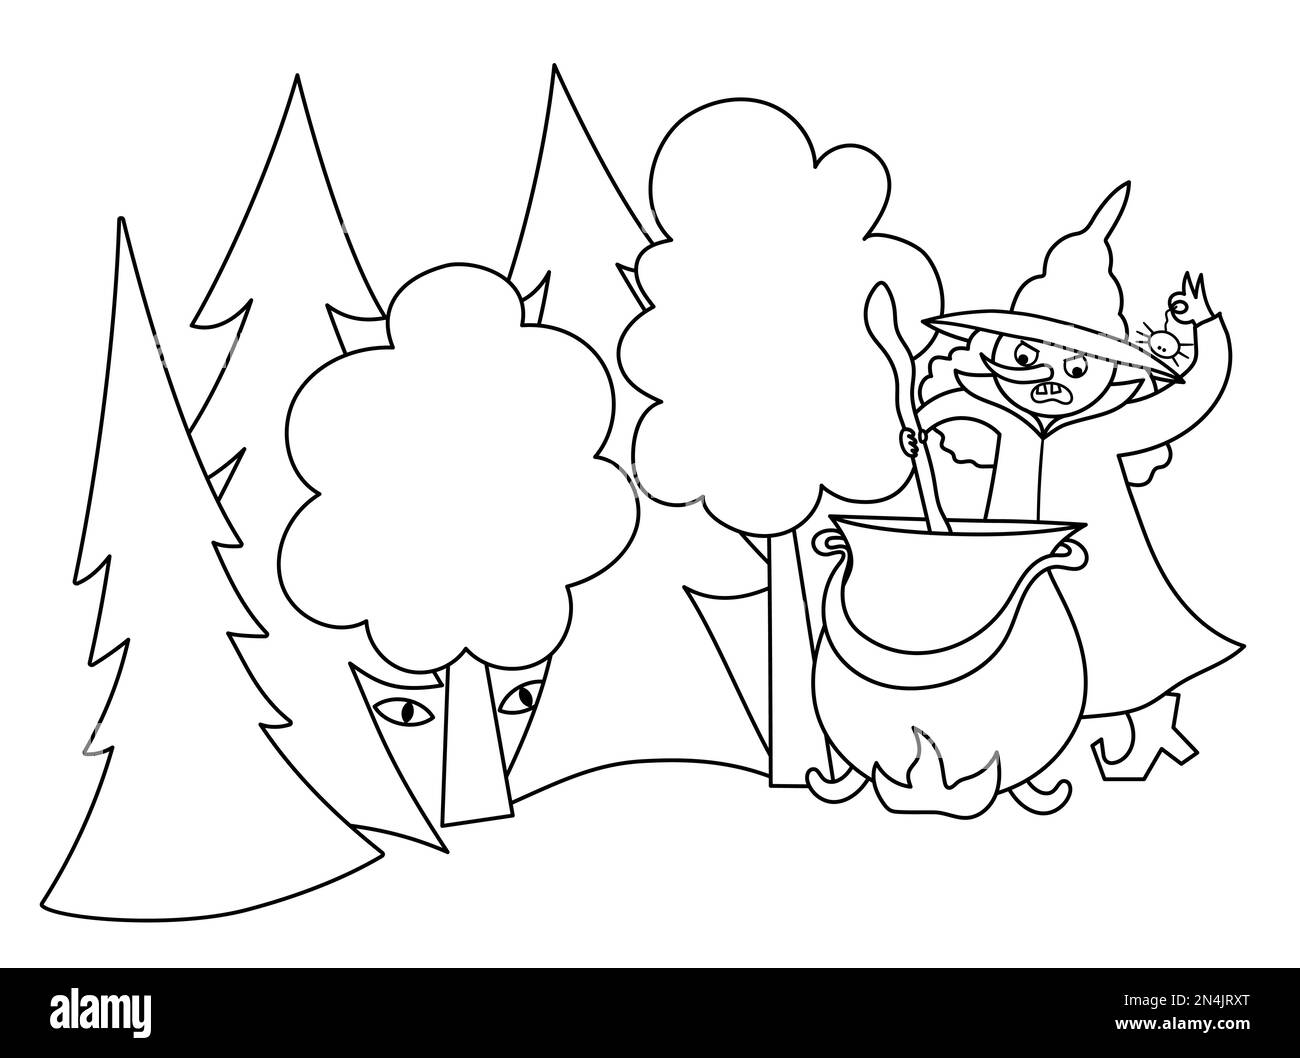 Fairy tale black and white vector magic forest illustration with witch, preparing potion in cauldron. Fairytale or Halloween fantasy line scene. Carto Stock Vector